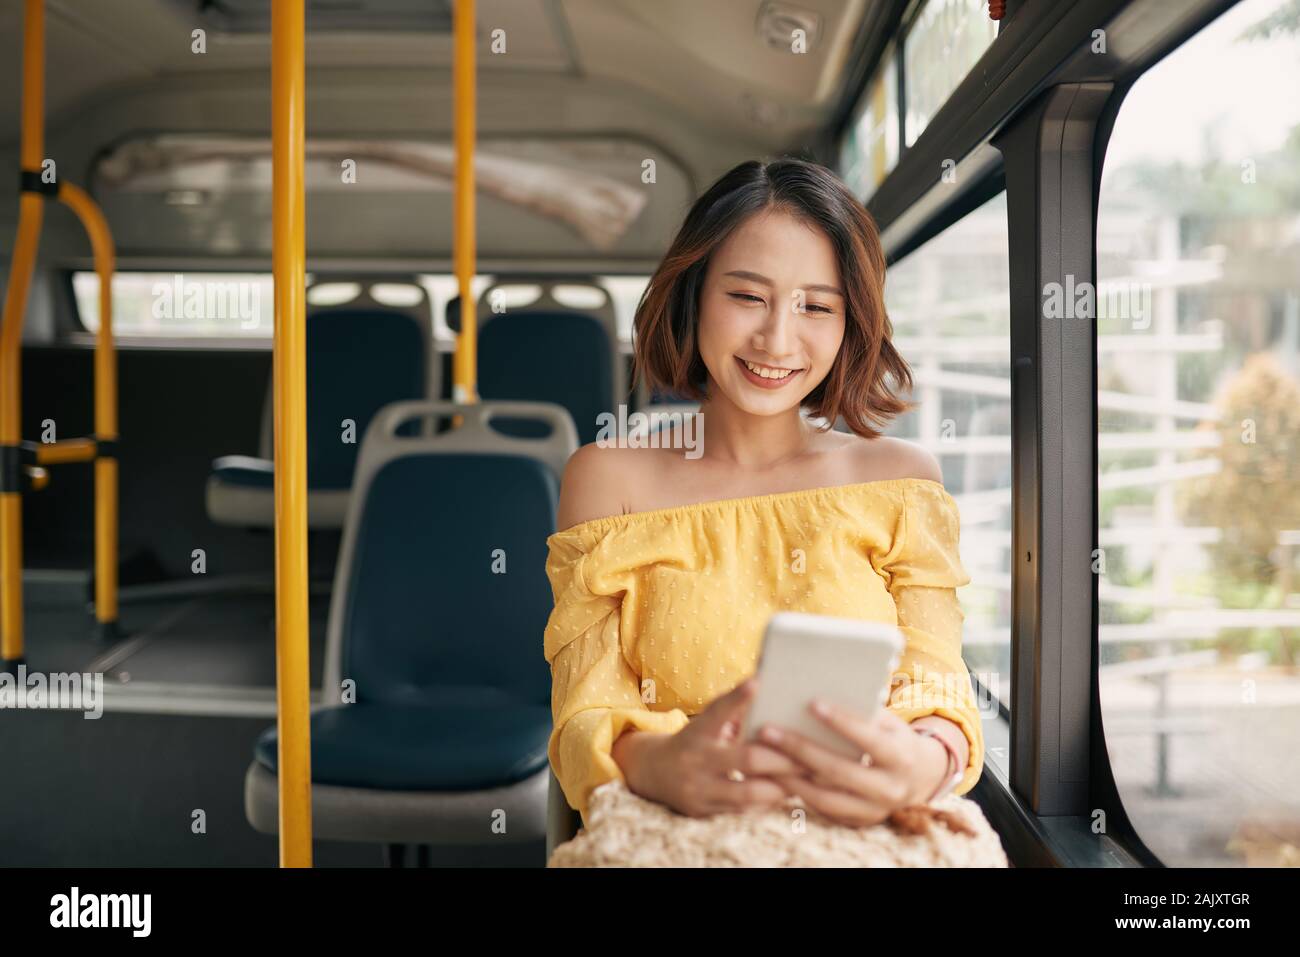 young beautiful asian woman browsing and typing messages in a public bus Stock Photo